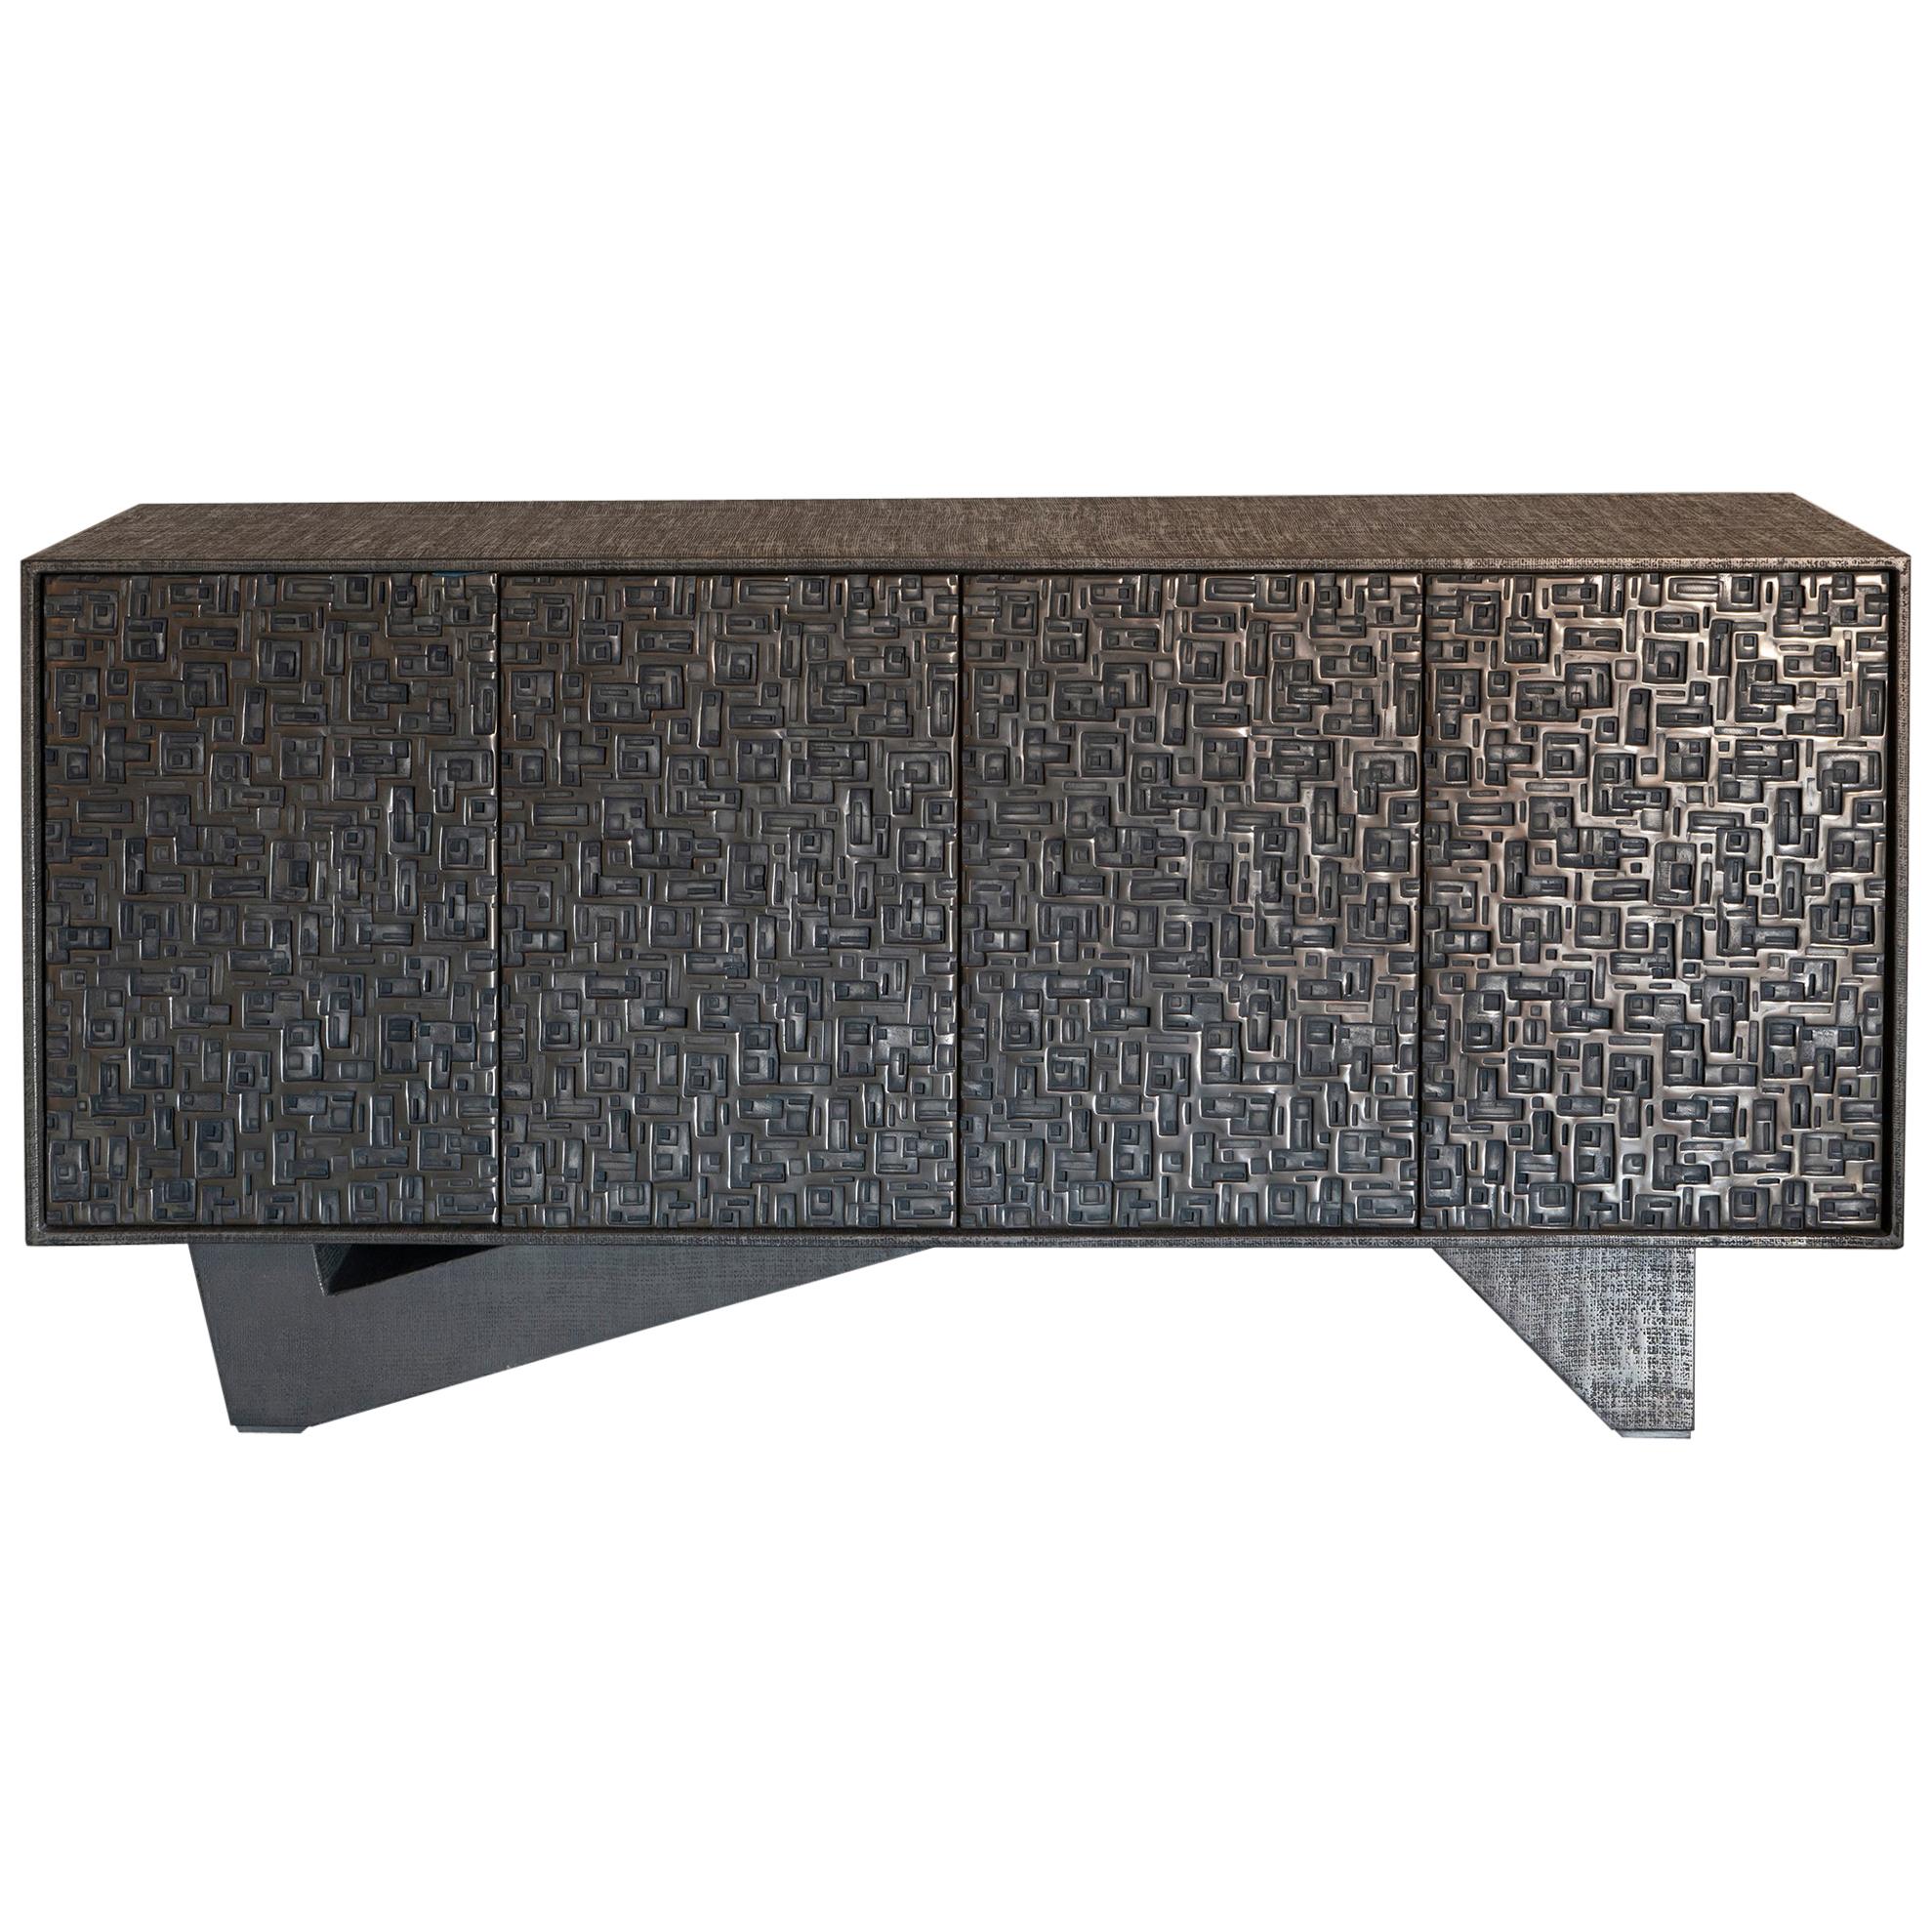 Zenoni for Flair Bronze Resin and Jute Fusion Sideboard, Italy, 2019